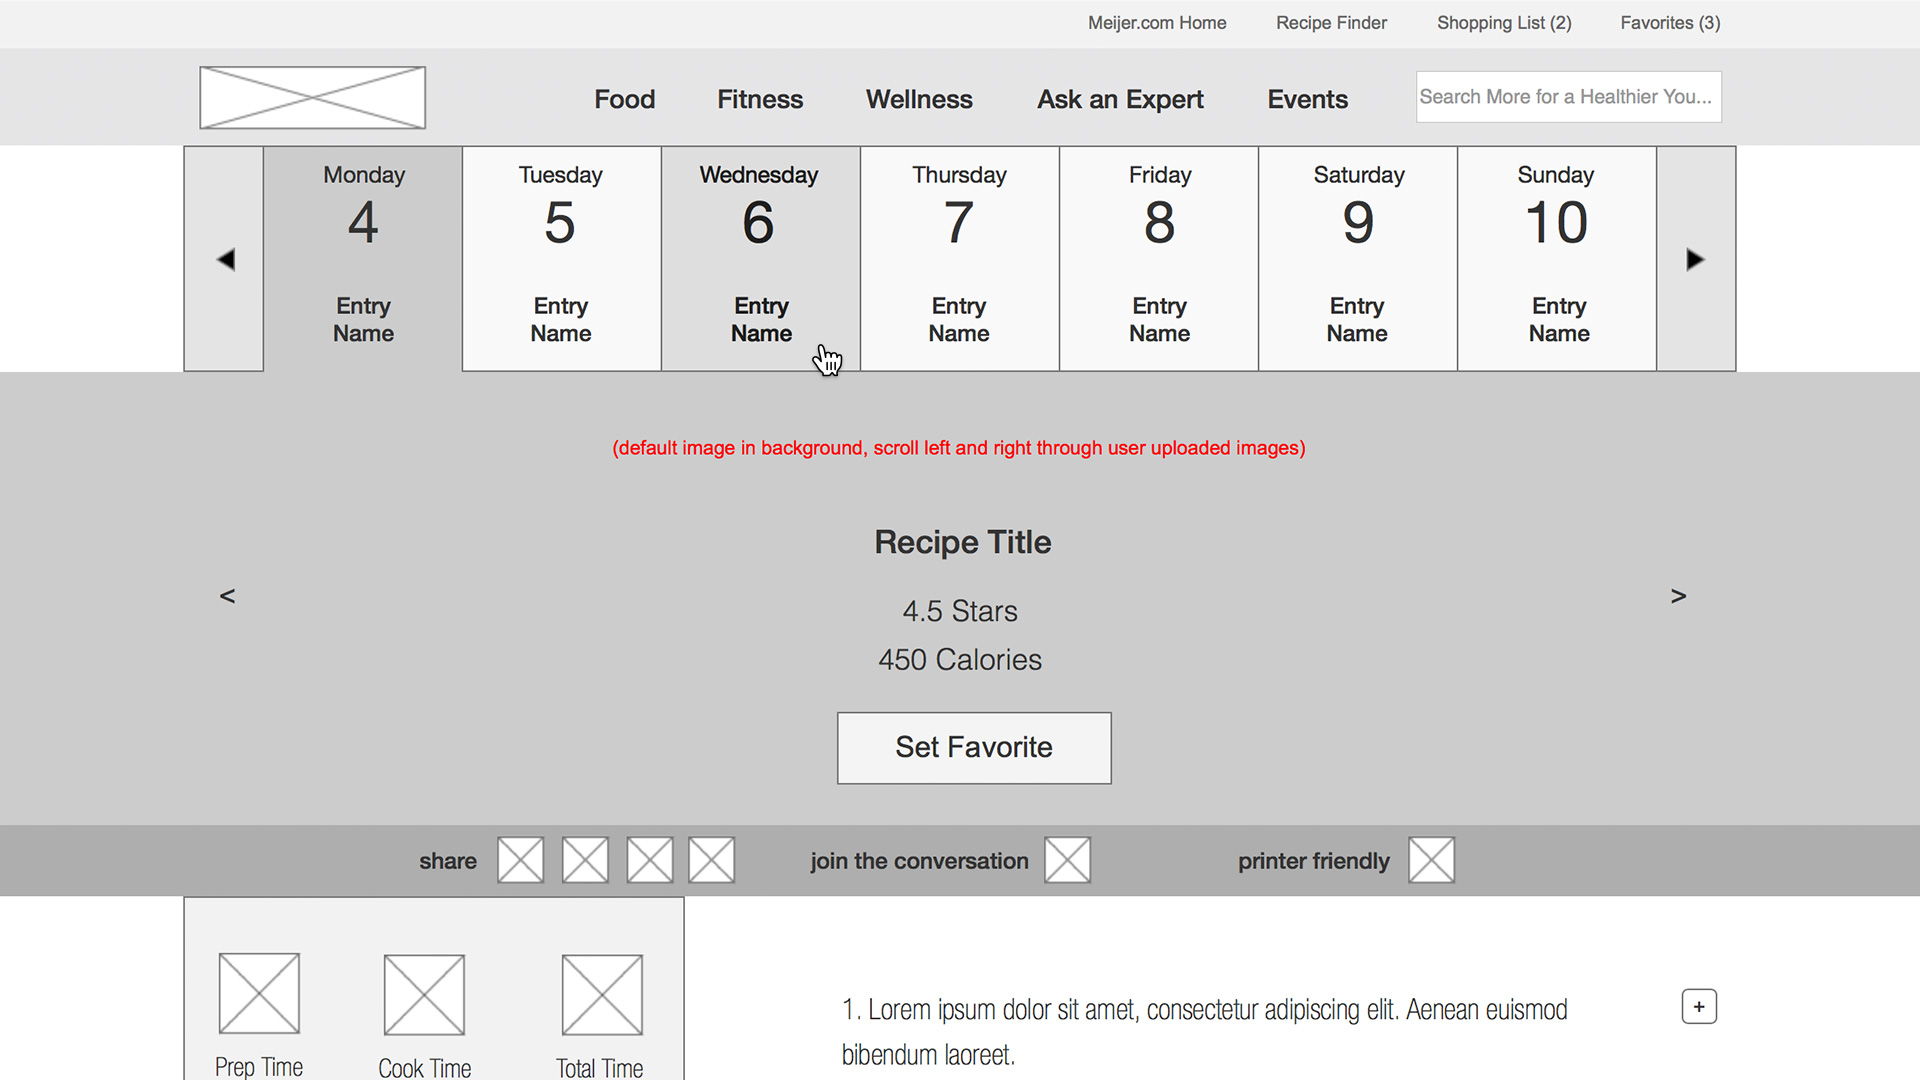 Meijer: Meal Planning Wireframe